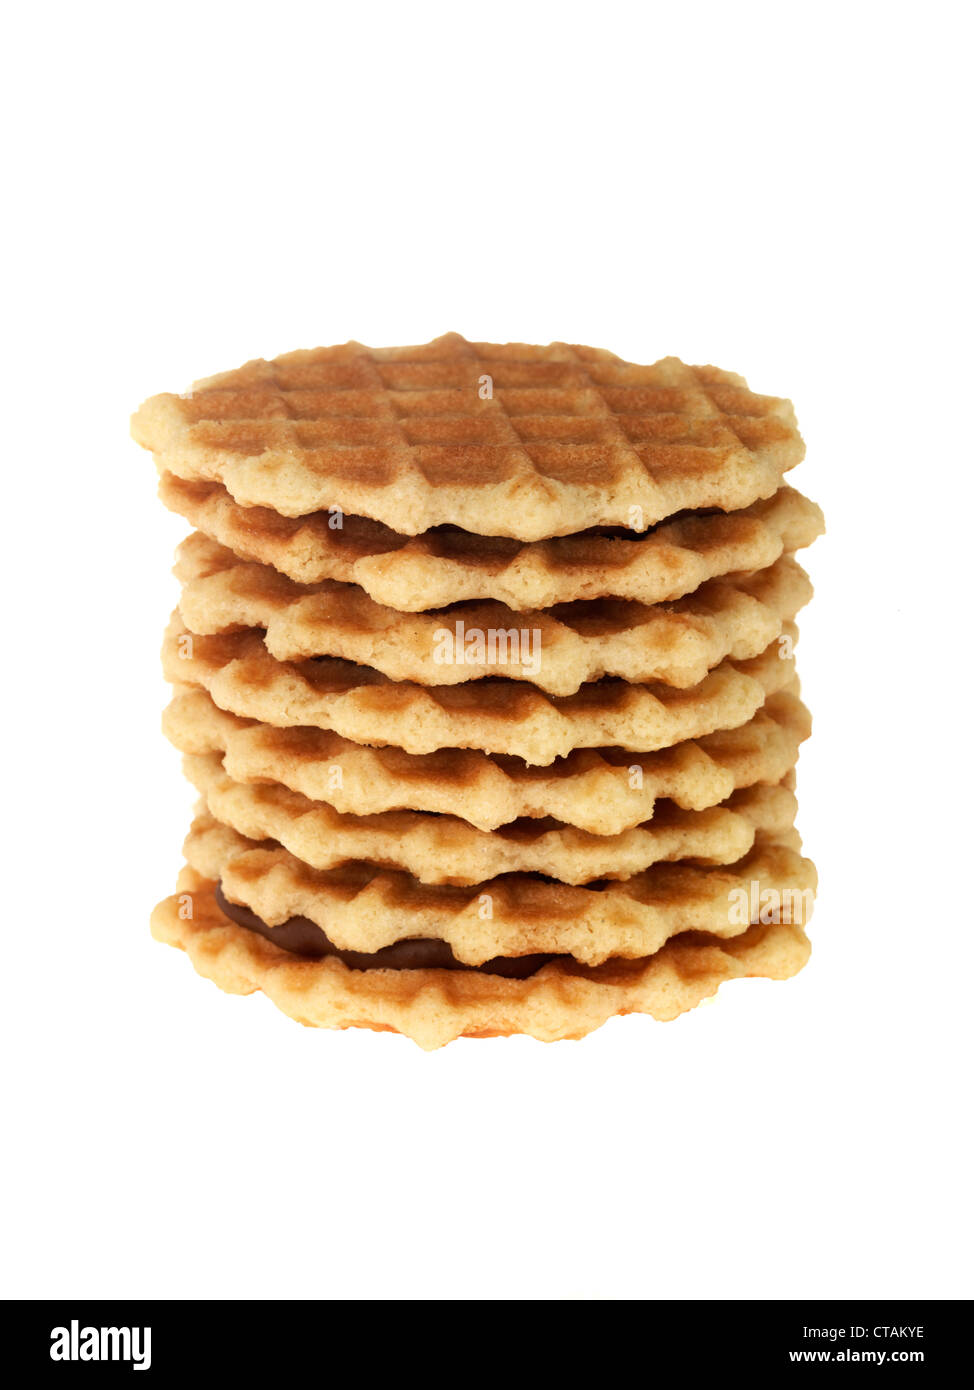 Fresh European Style Tasty Breakfast Chocolate Waffle Sandwich Snacks Against A White Background, With A Clipping Path, And No People Stock Photo